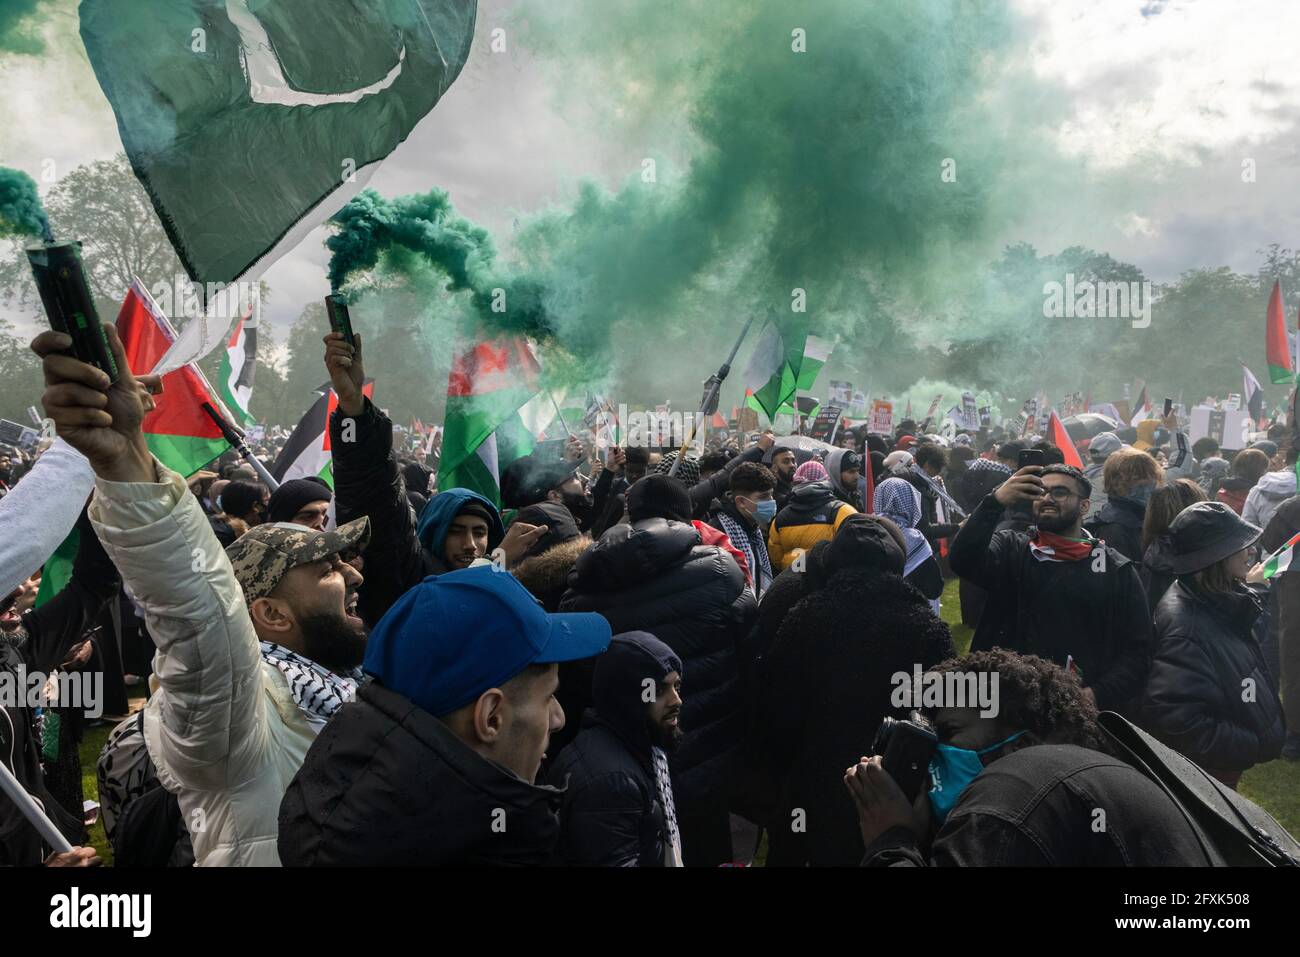 Crowd of protesters with smoke bombs and Palestinian flags under stormy sky, Free Palestine Protest, London, 22 May 2021 Stock Photo